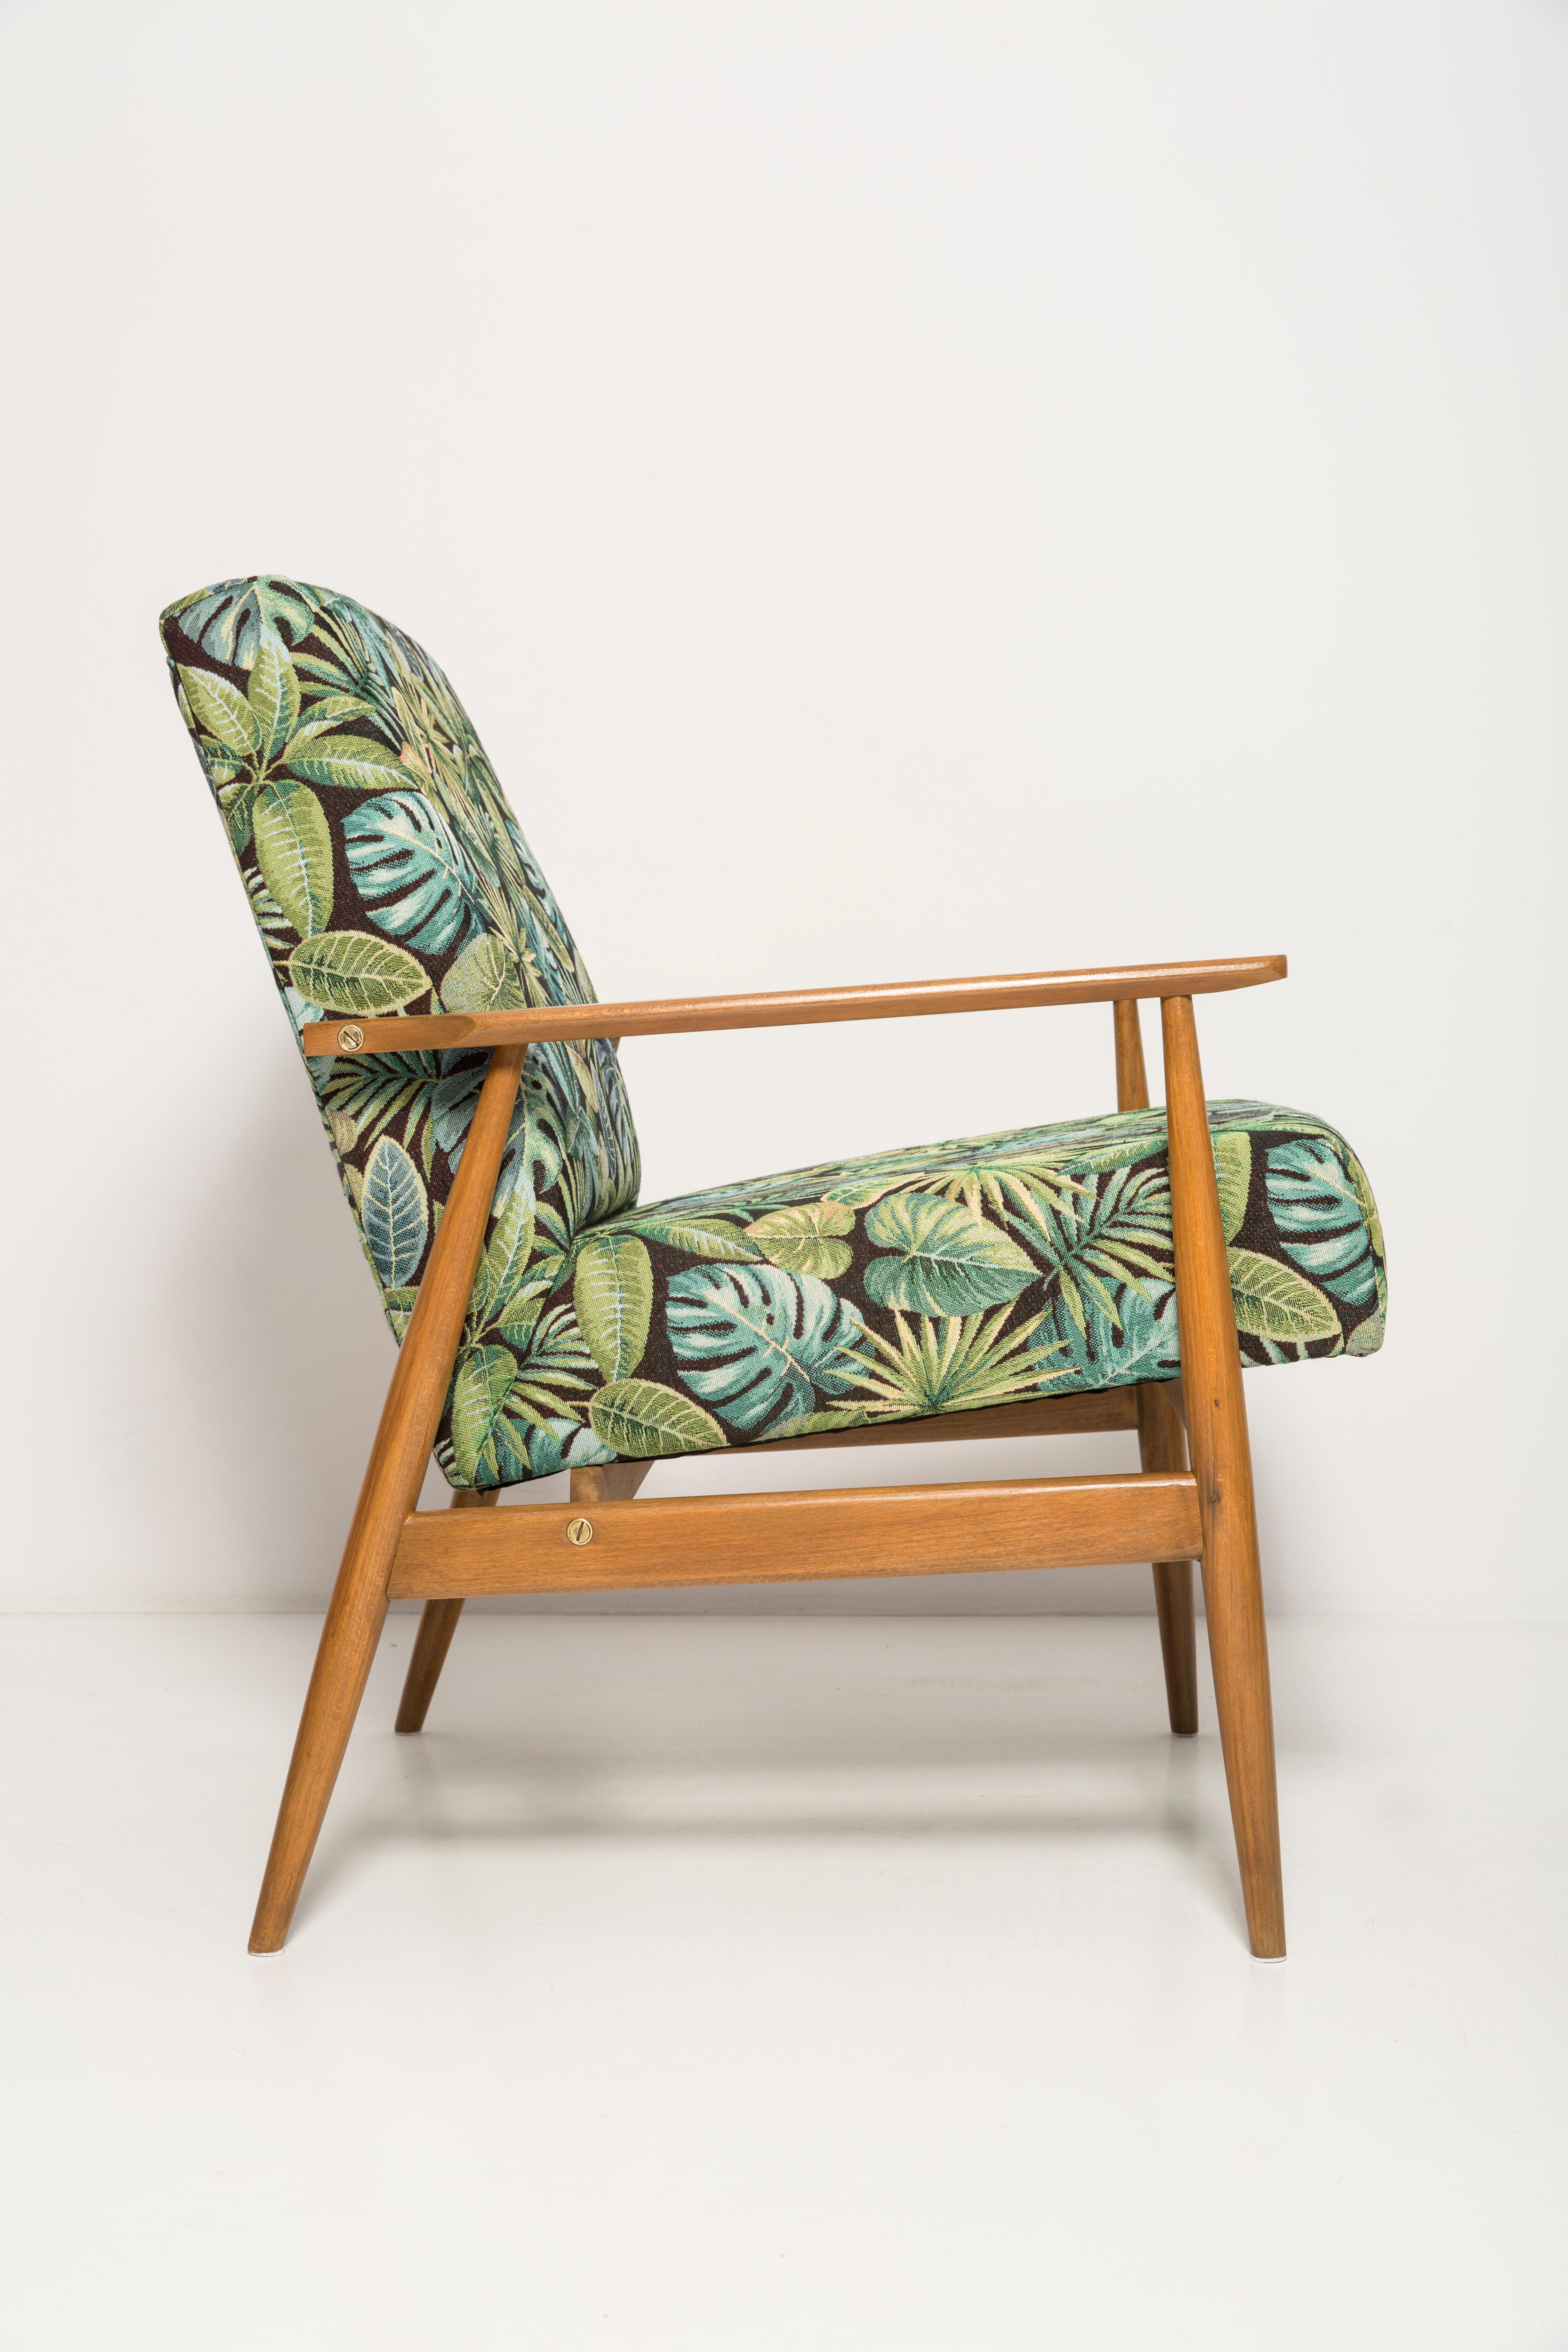 Pair of Mid-Century Green Leaves Jacquard Dante Armchairs, H. Lis, 1960s For Sale 2